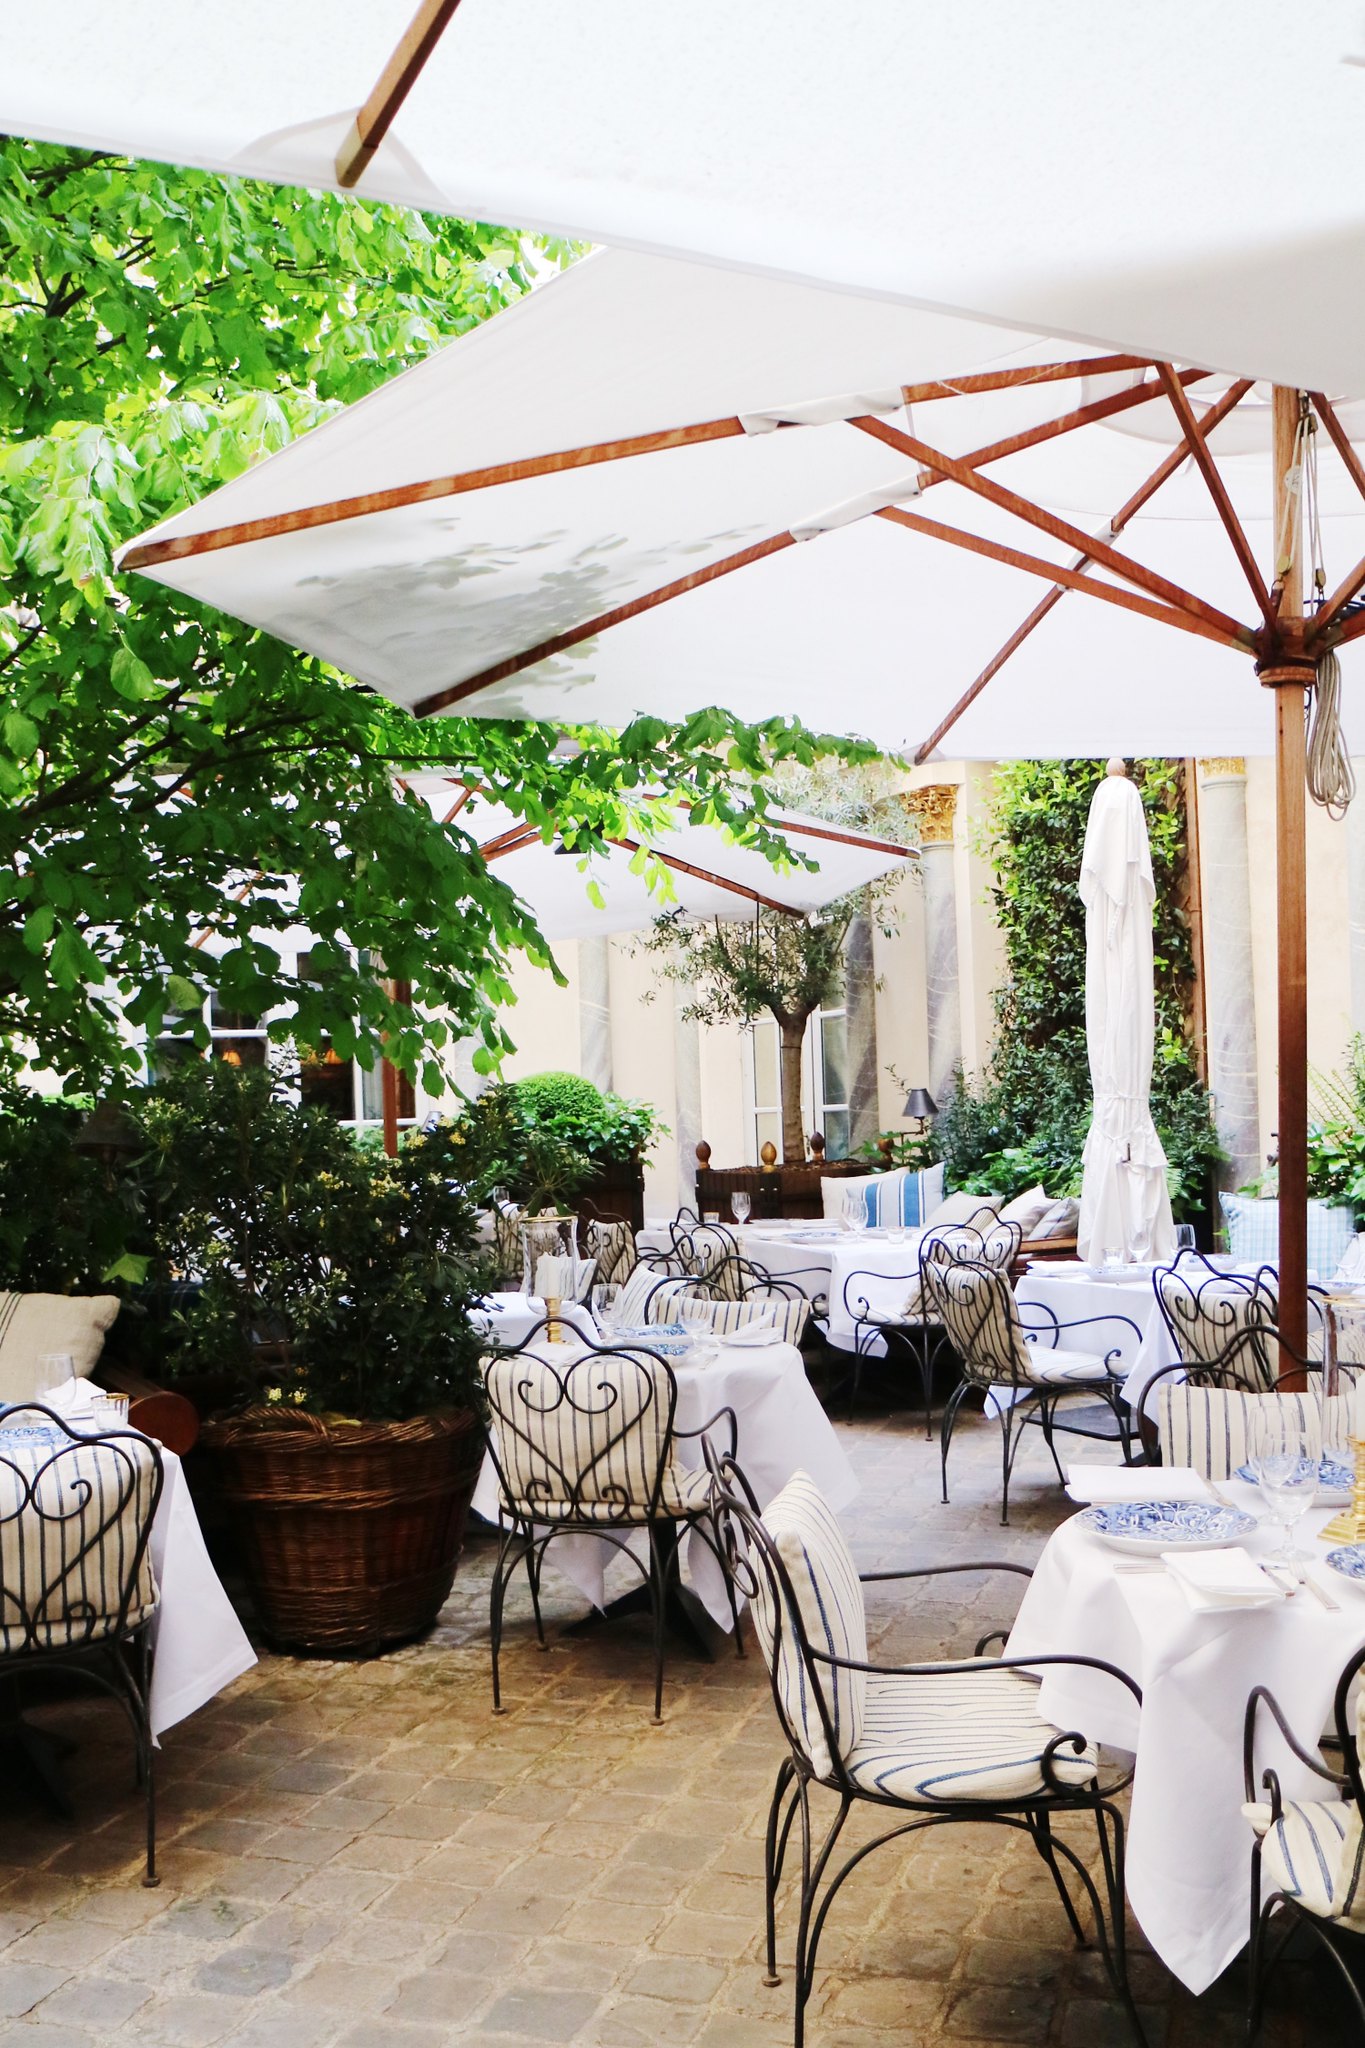 Restaurants you can not miss in Paris | THE DAILY HAPPINESS